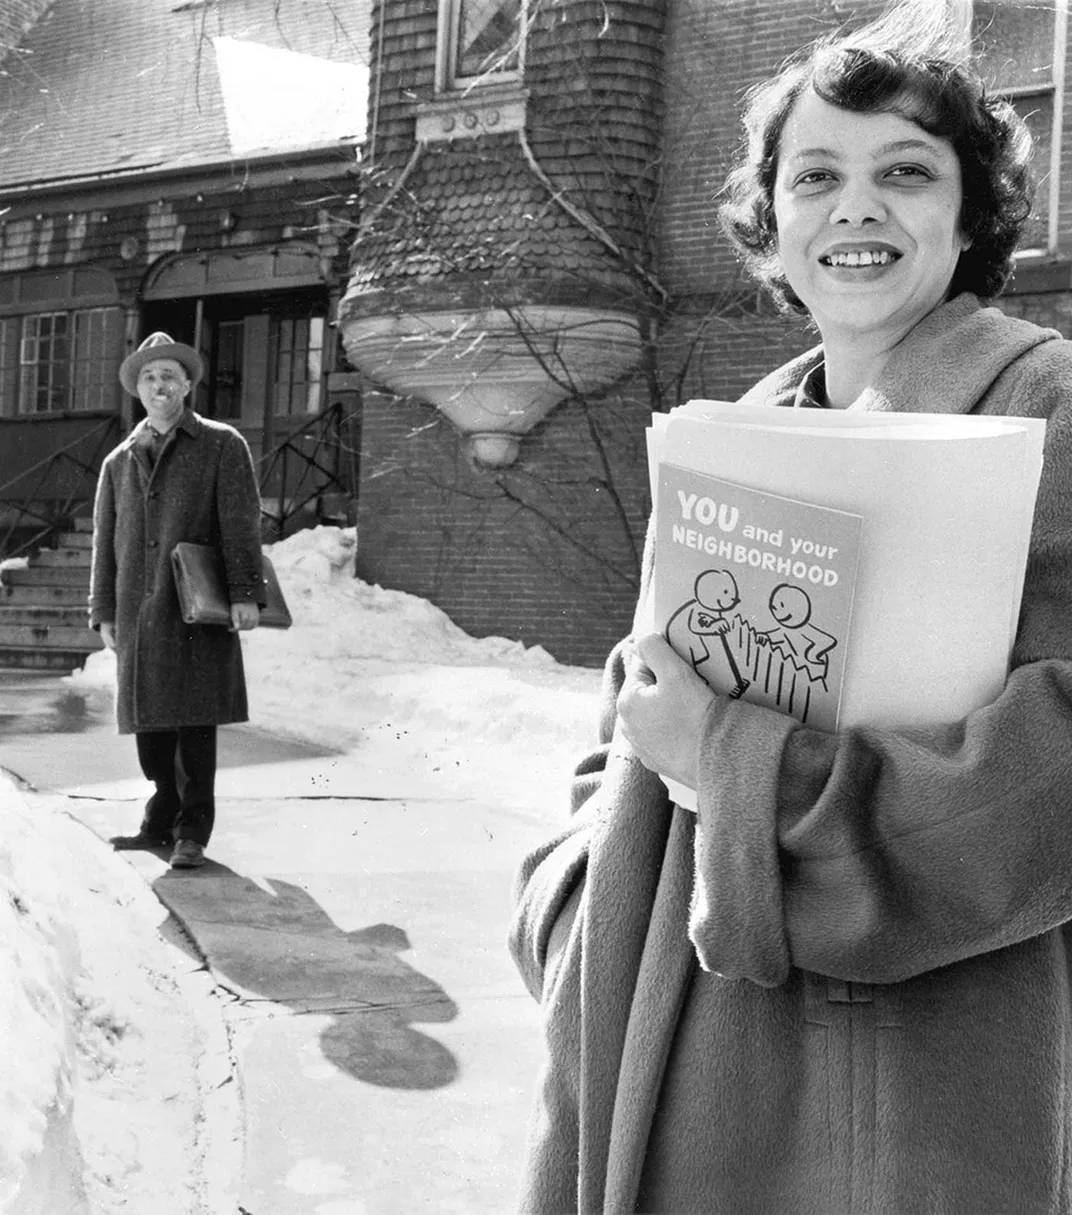 A man and women smiling at camera standing outside of brick building in snow